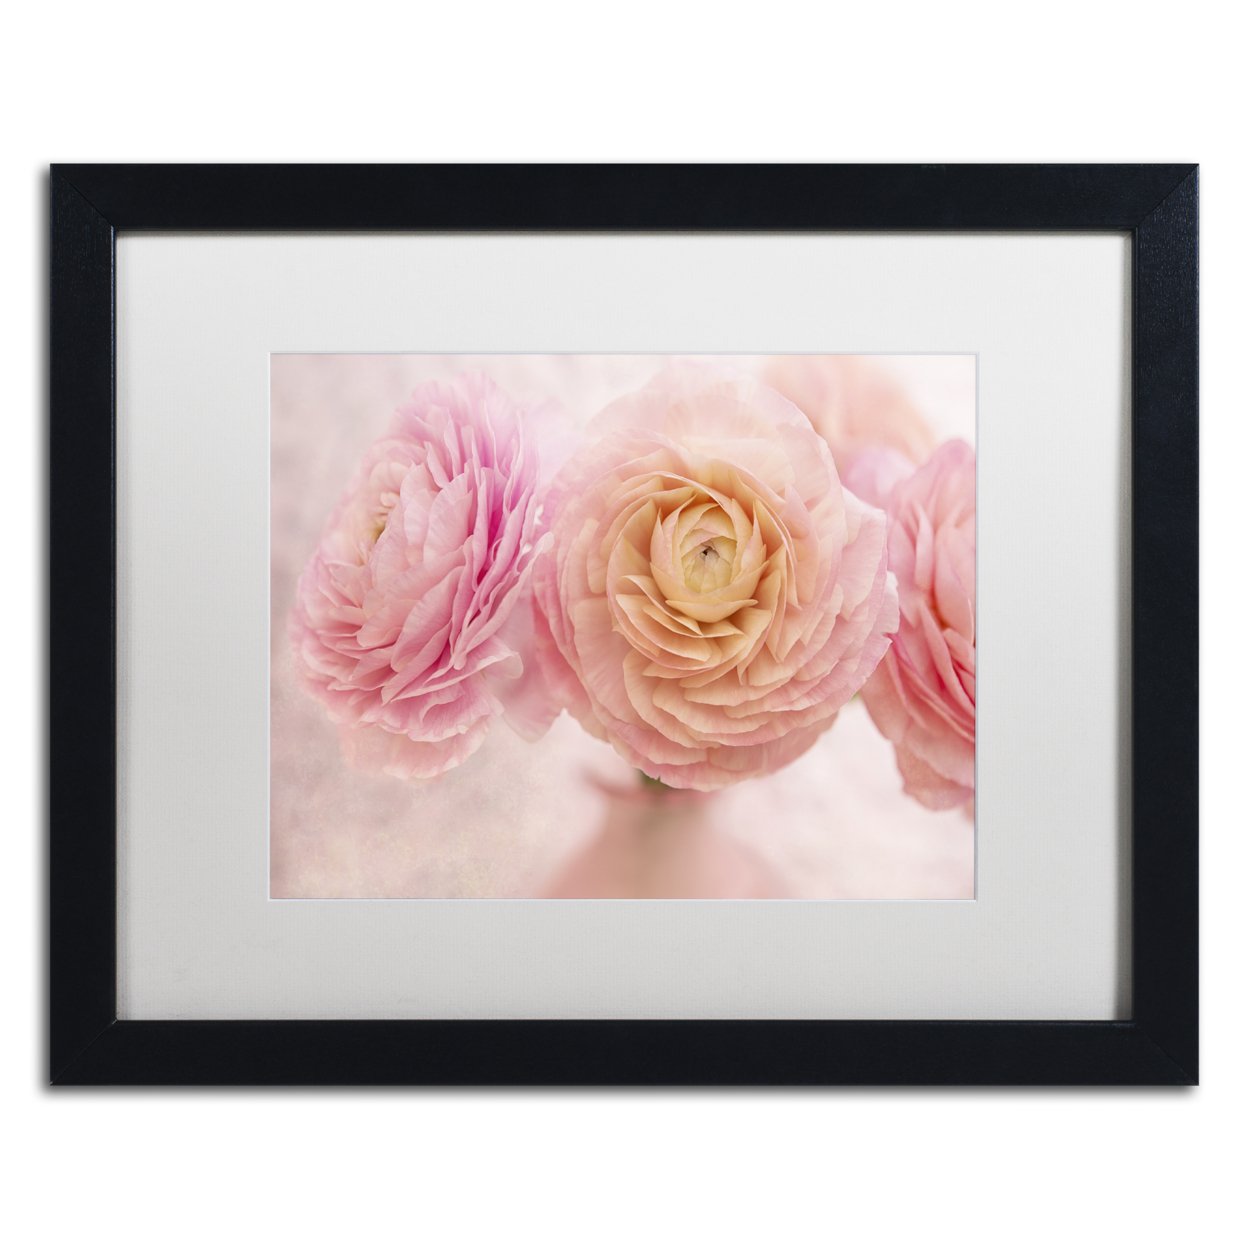 Cora Niele 'Pink Persian Buttercup Bouquet' Black Wooden Framed Art 18 X 22 Inches